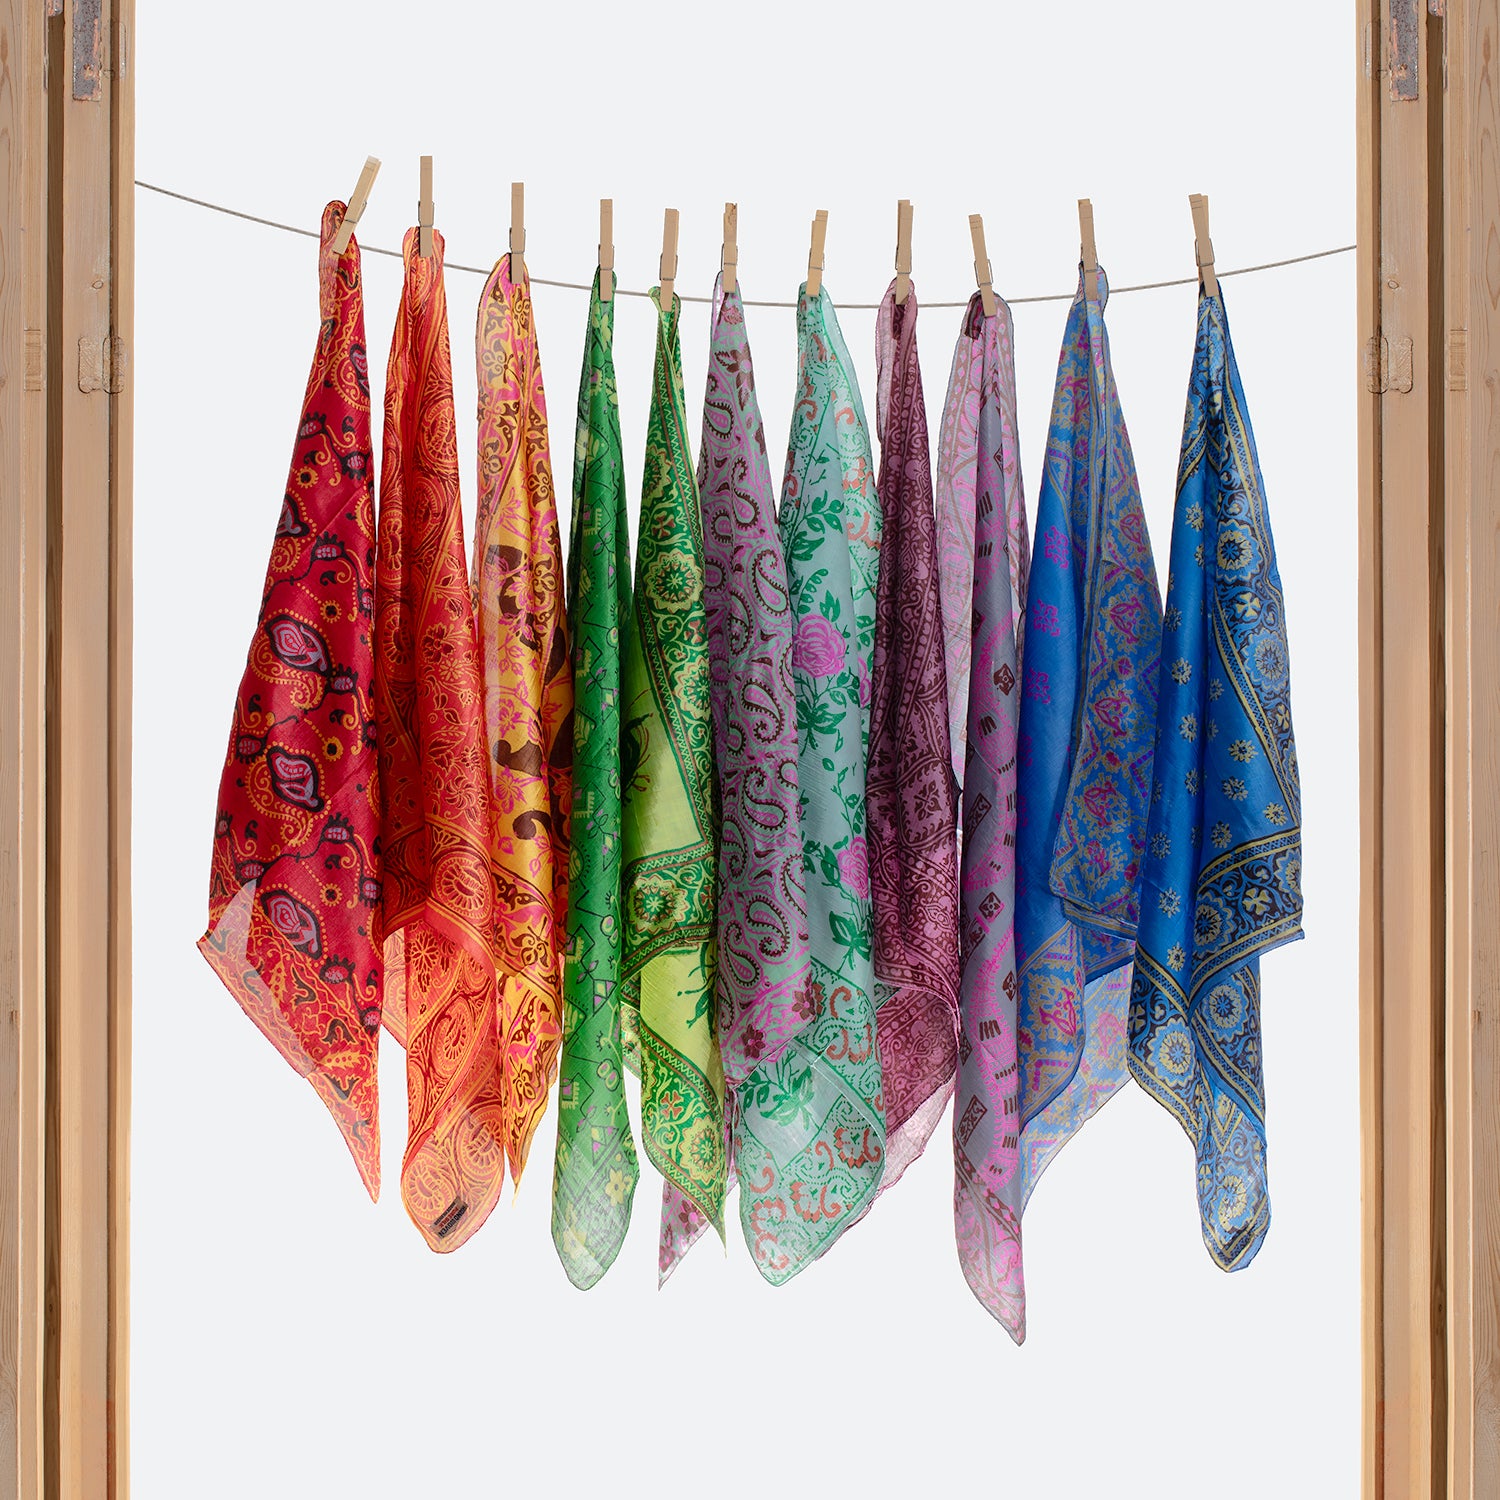 ILA SODHANI hand printed scarves hanging in a door frame